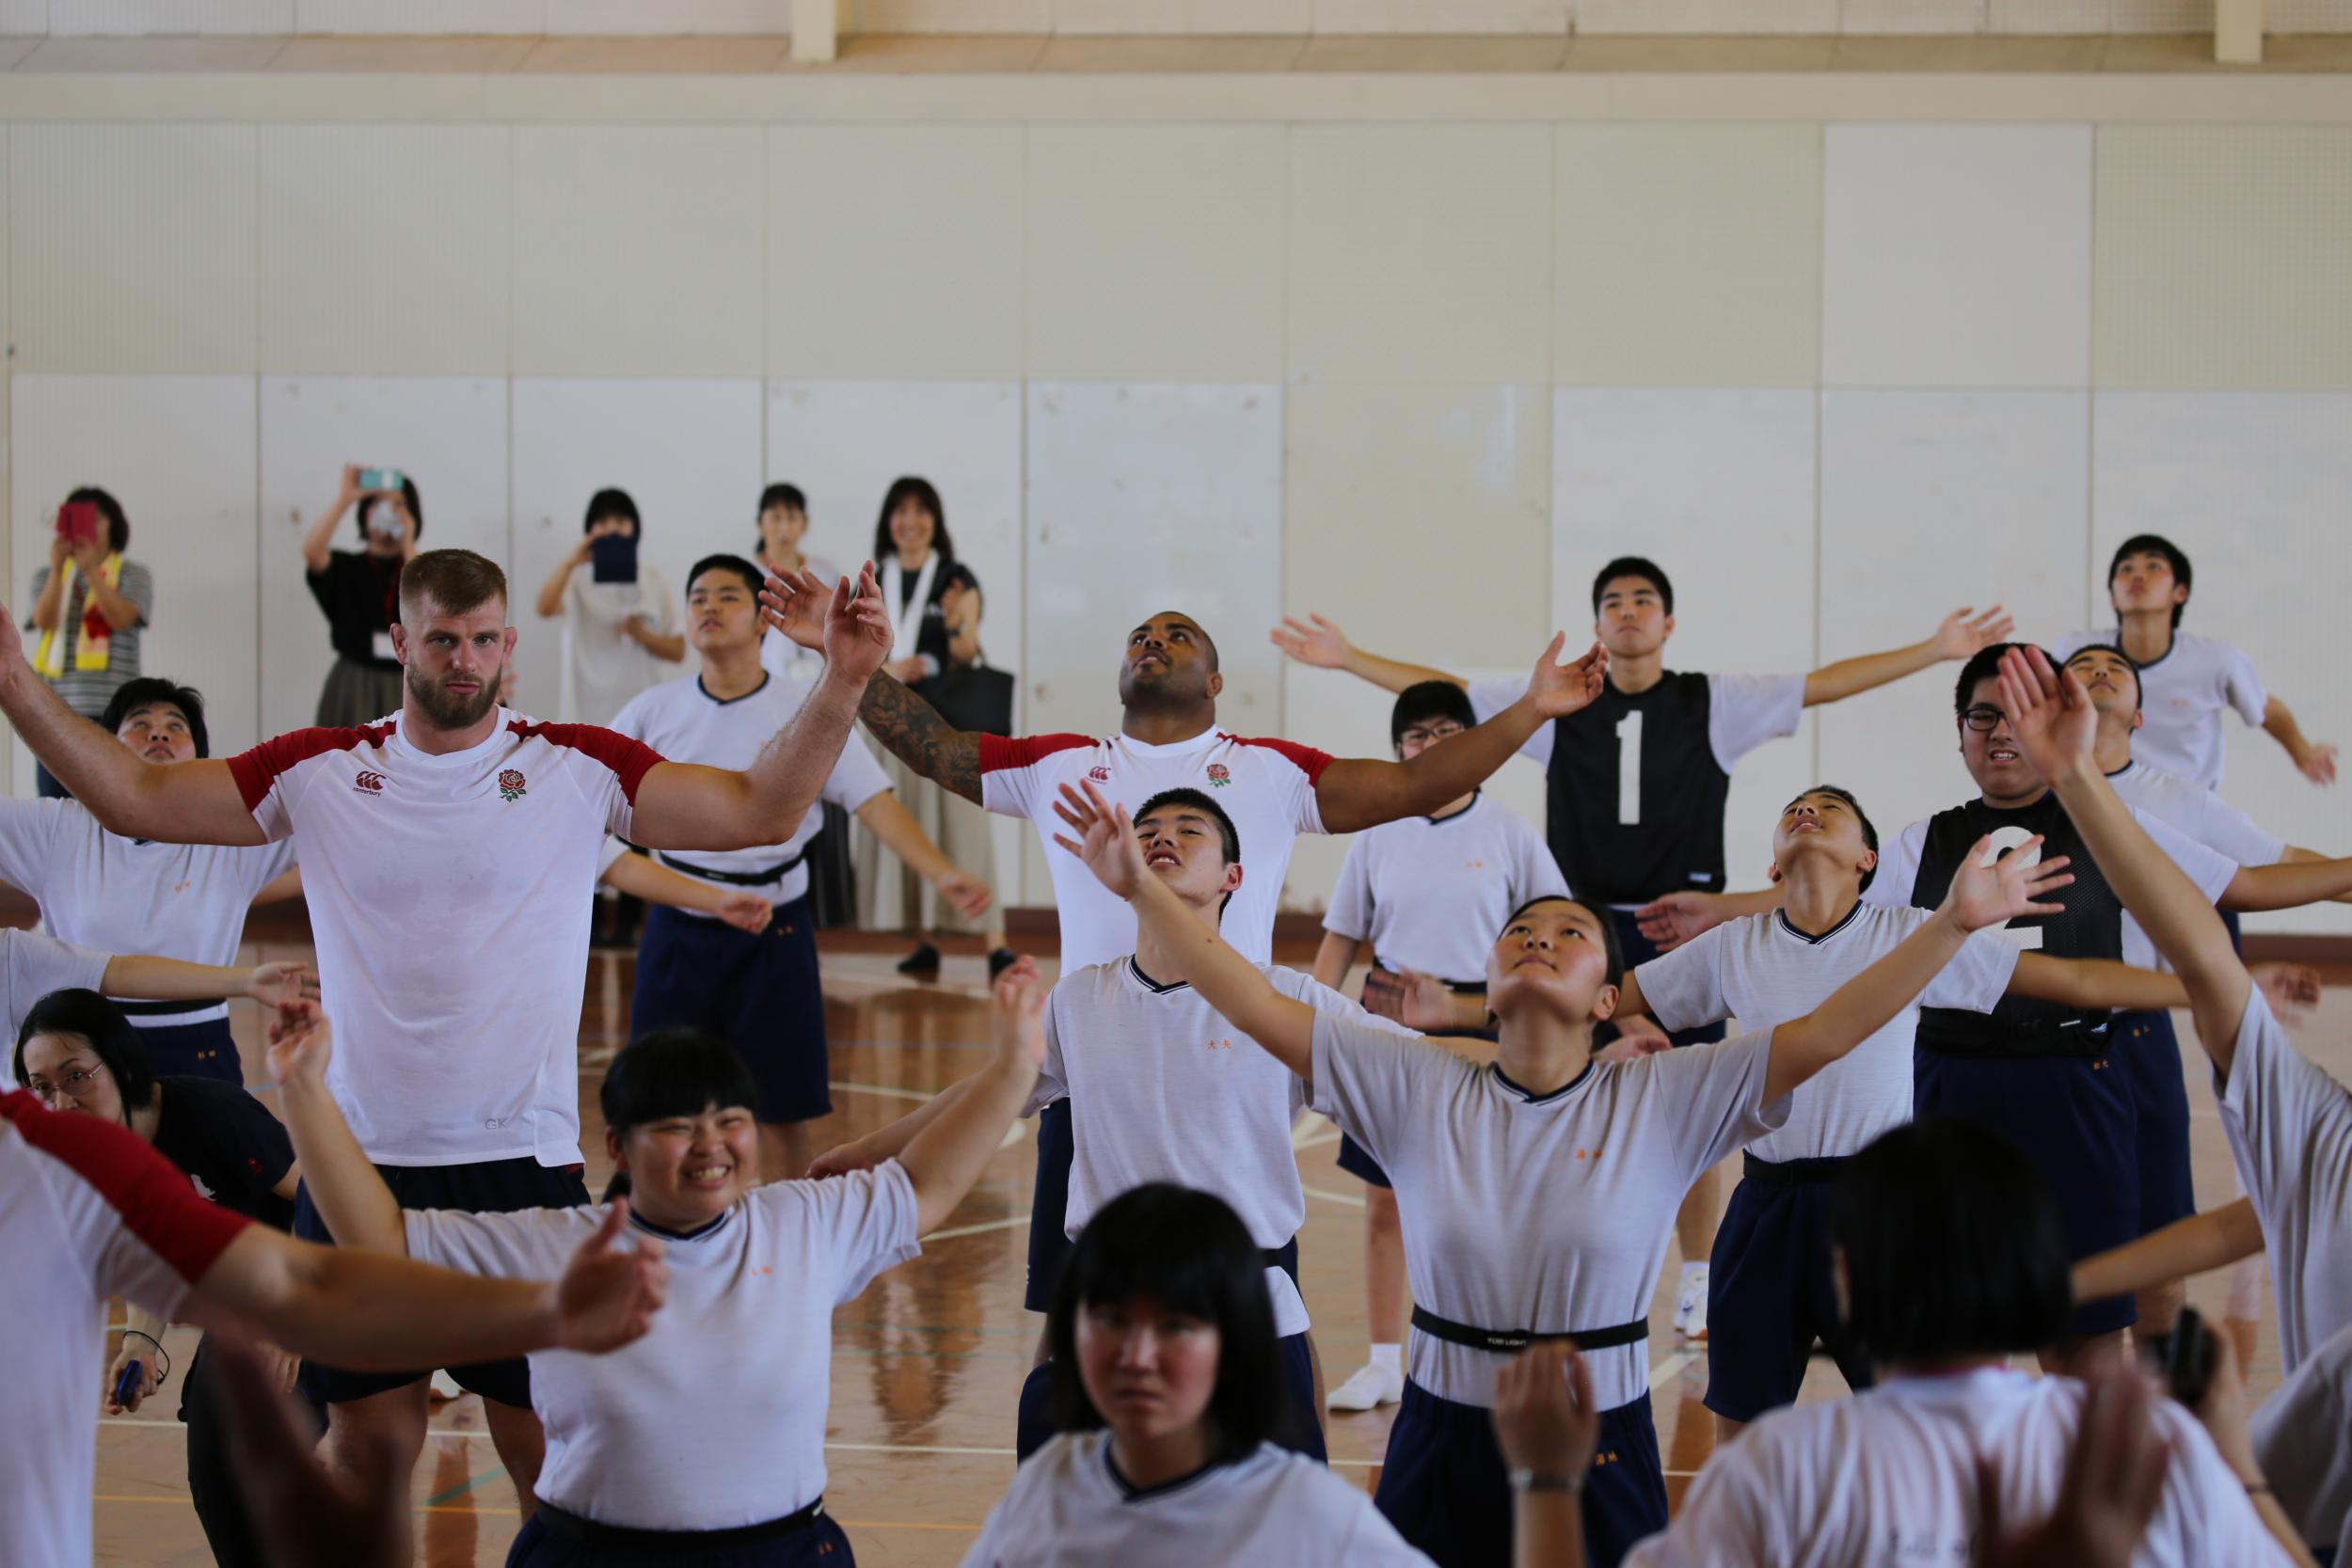 England visited two schools during their stay in Miyazaki